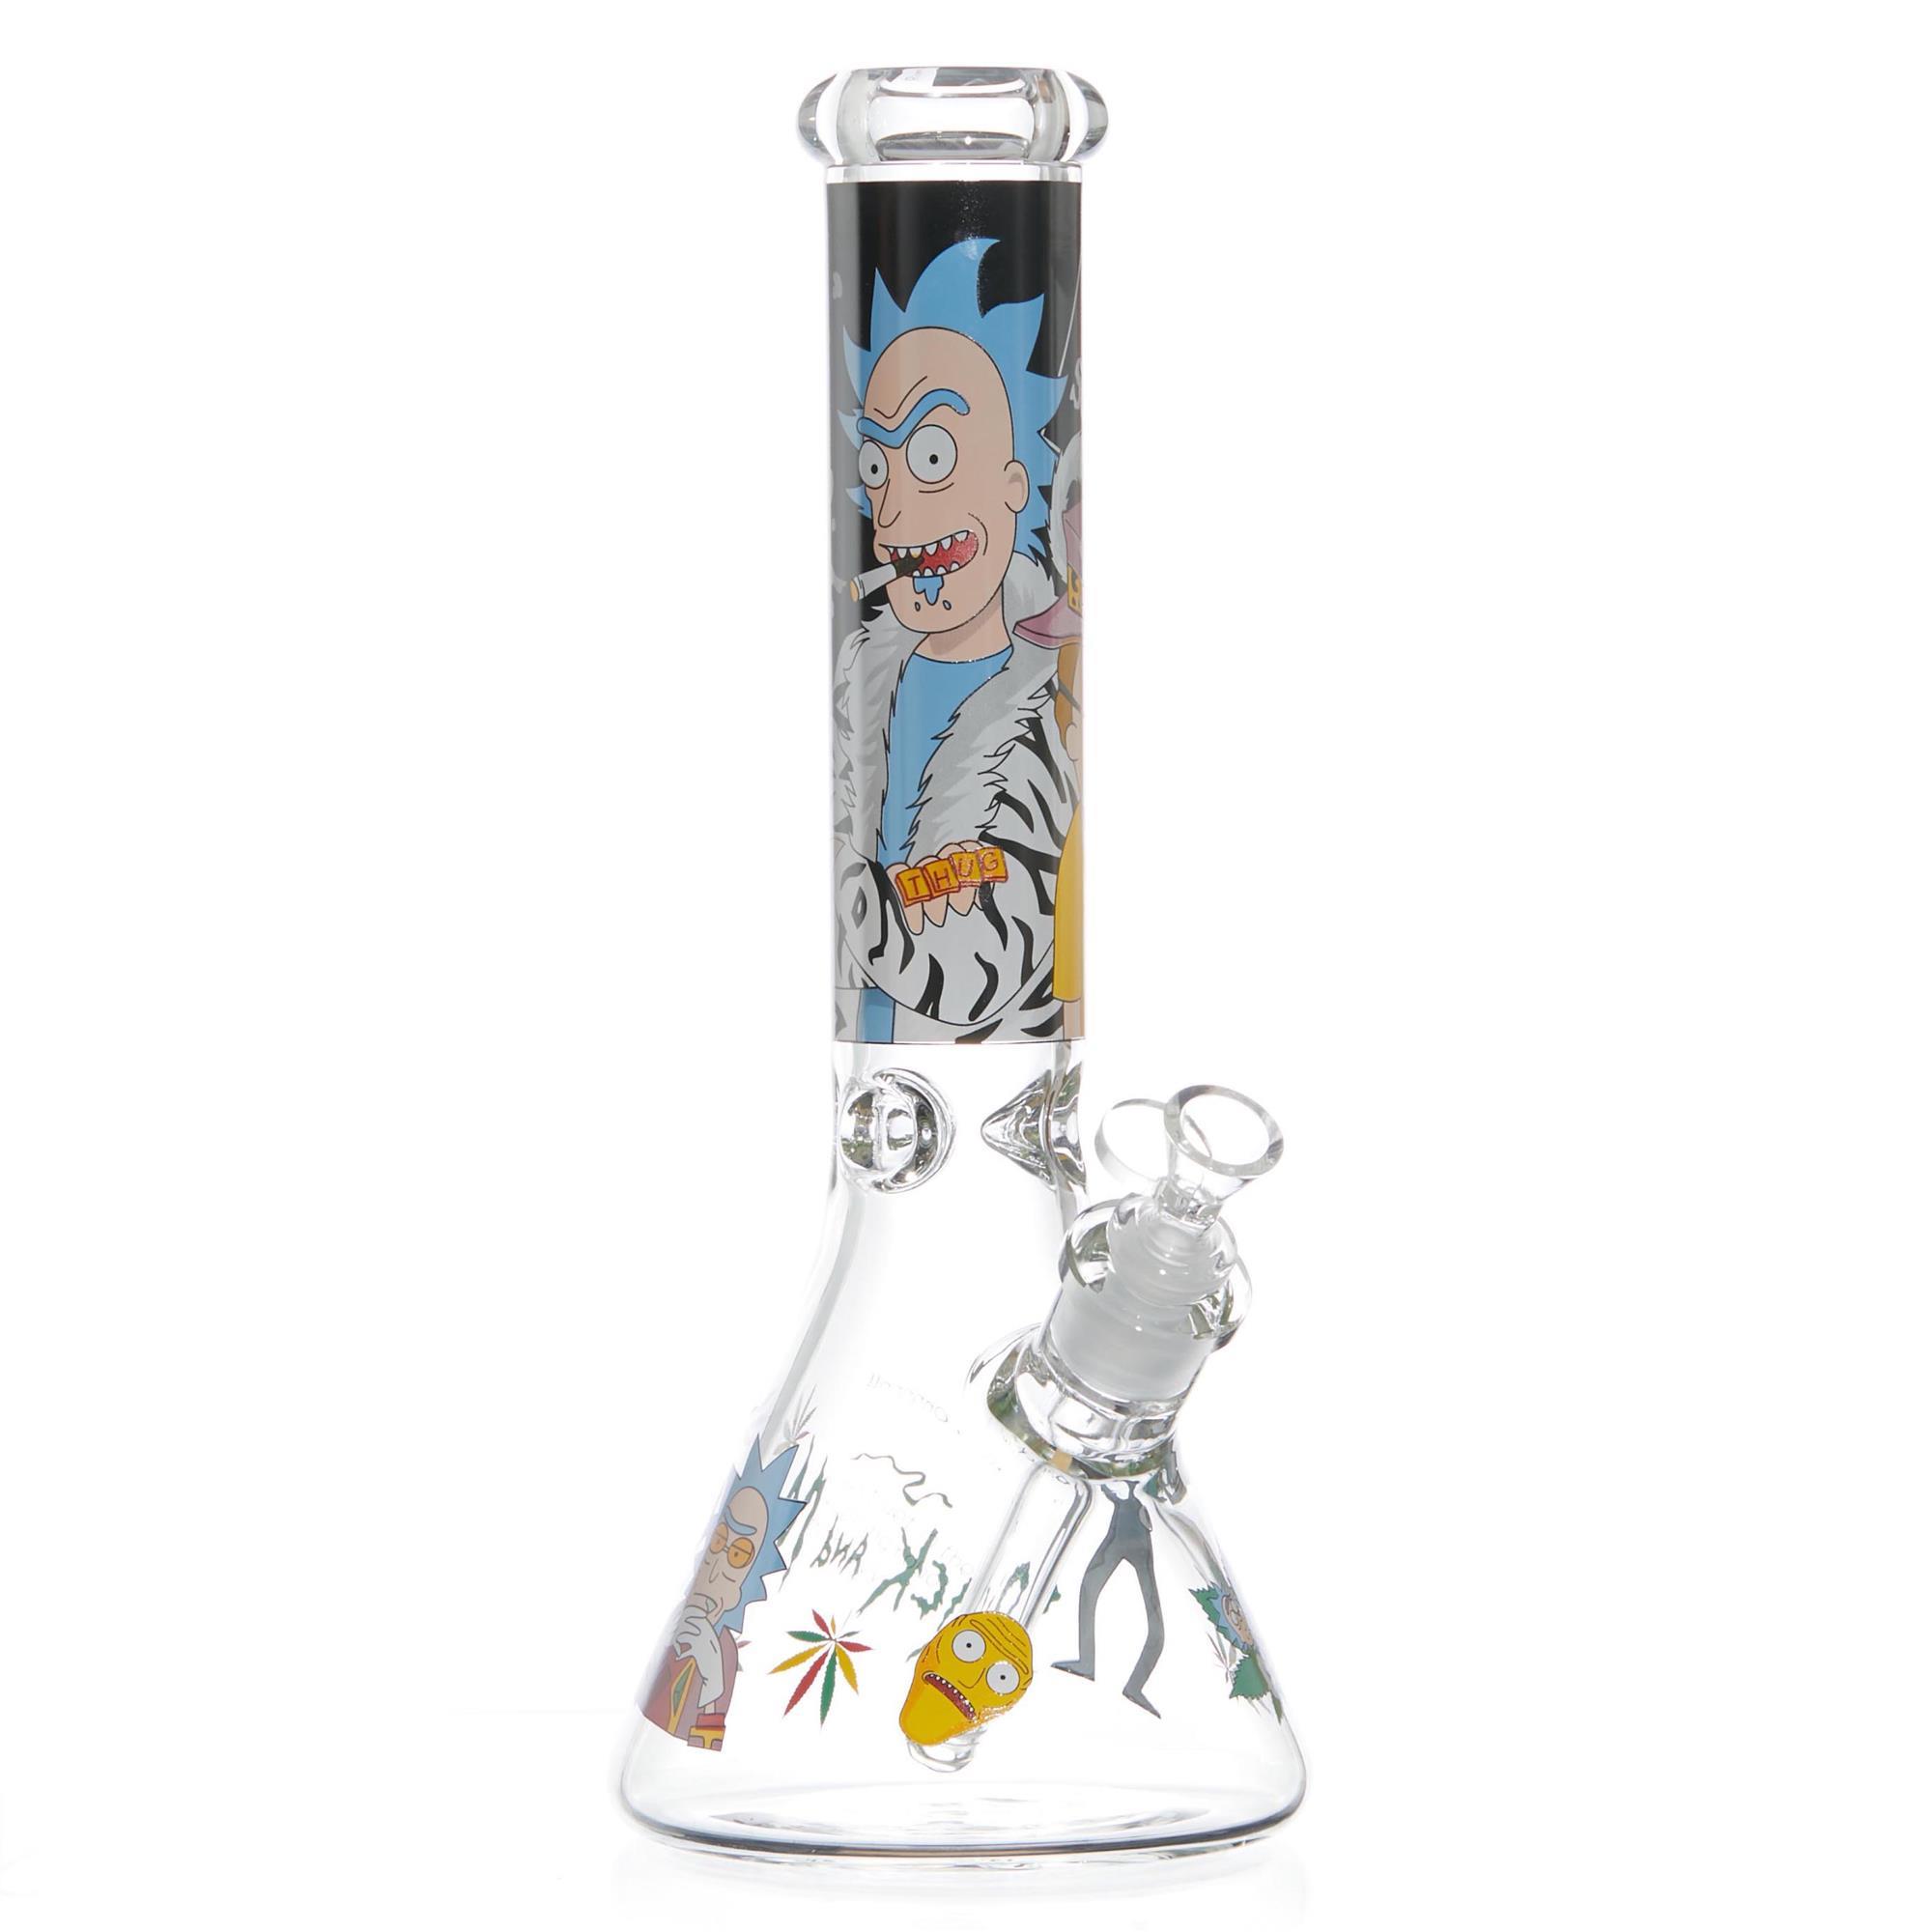 RICK AND MORTY KIT A